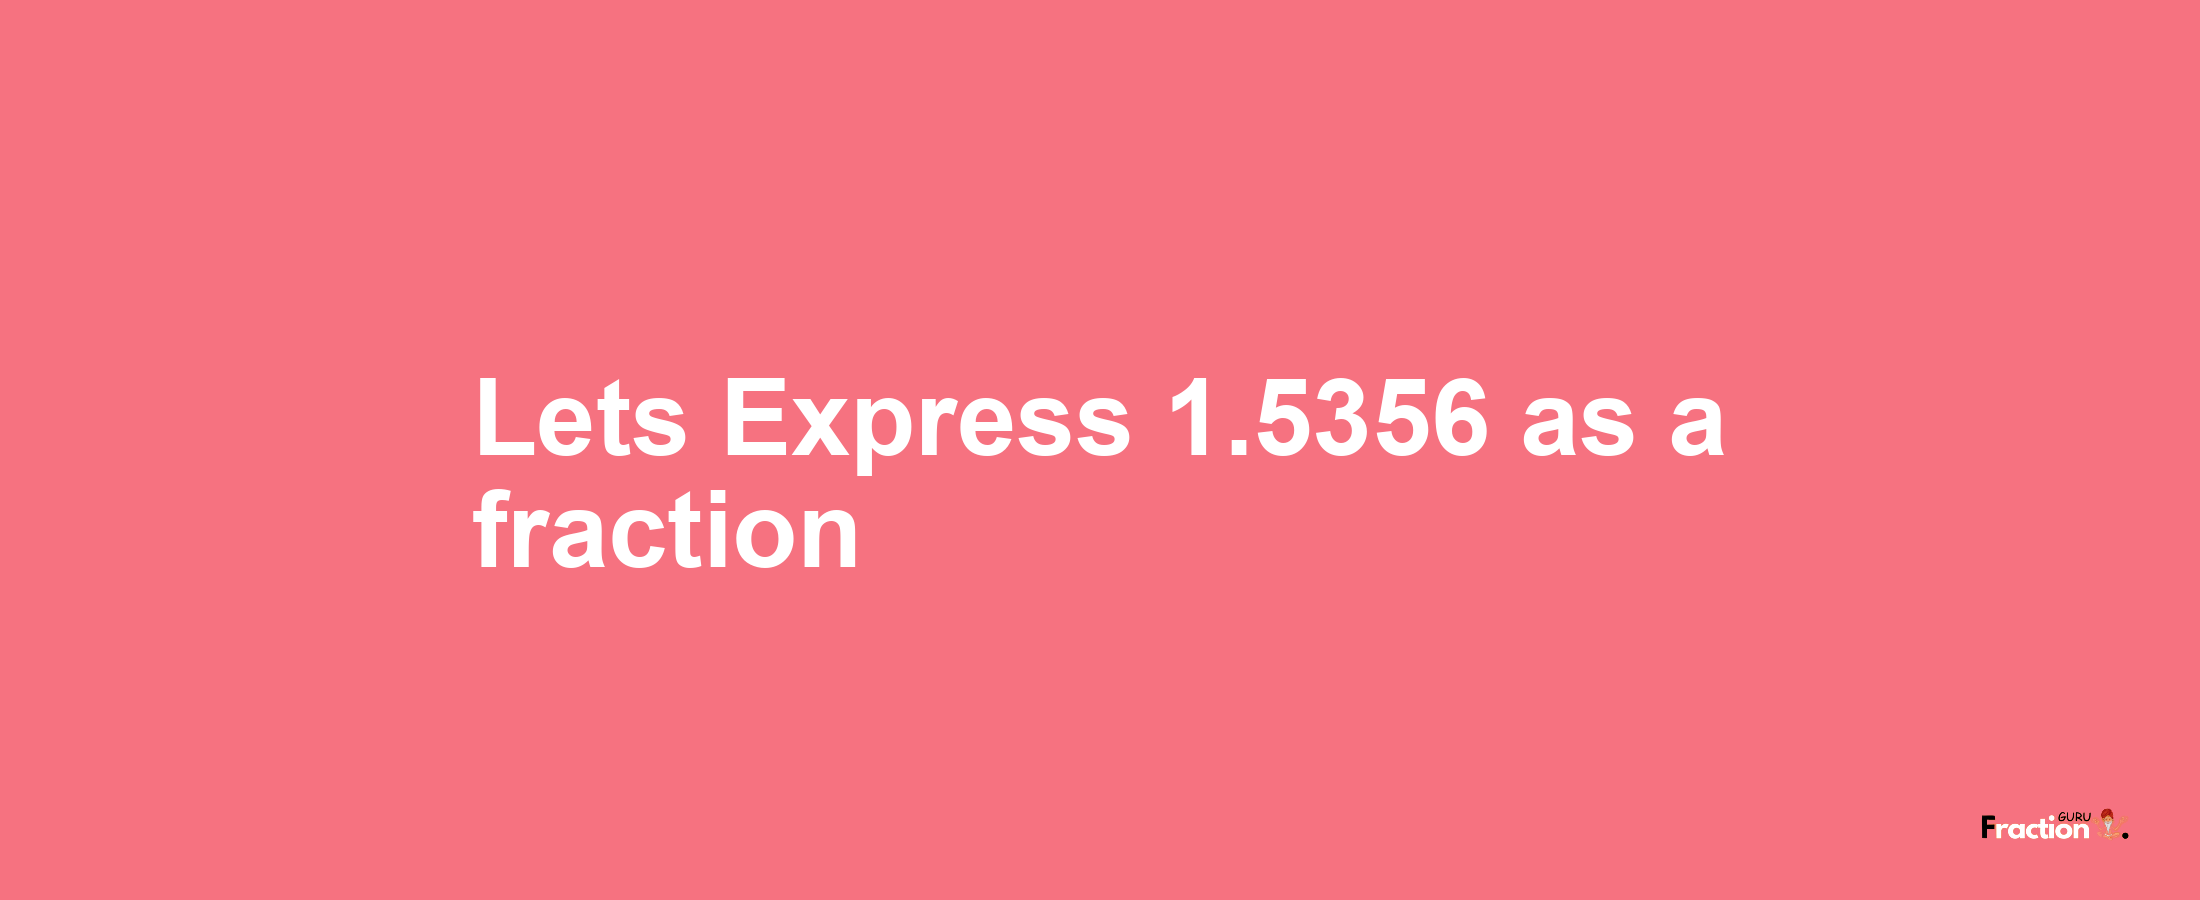 Lets Express 1.5356 as afraction